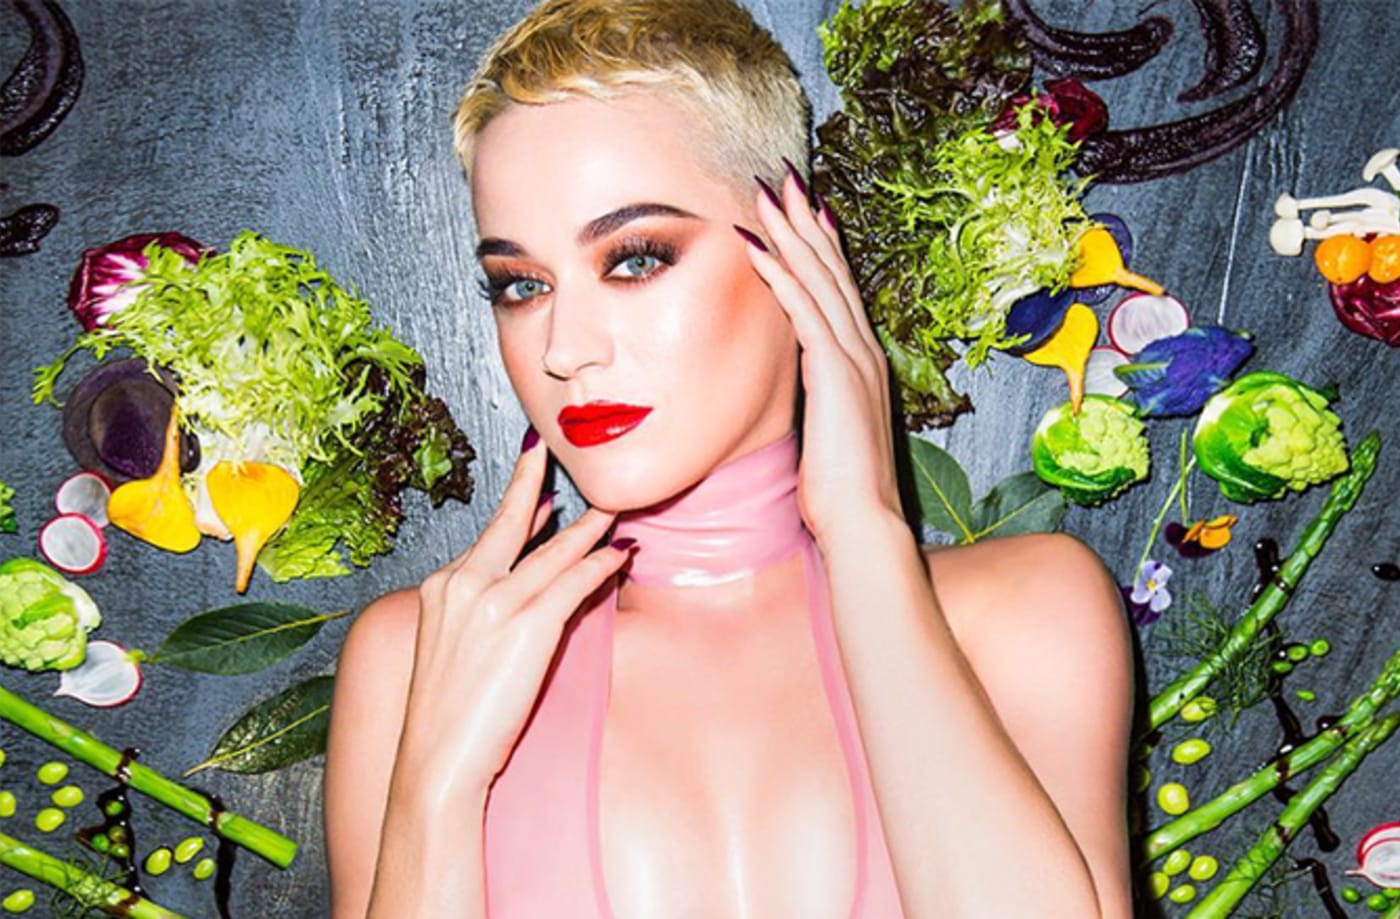 This is a photo of Katy Perry.